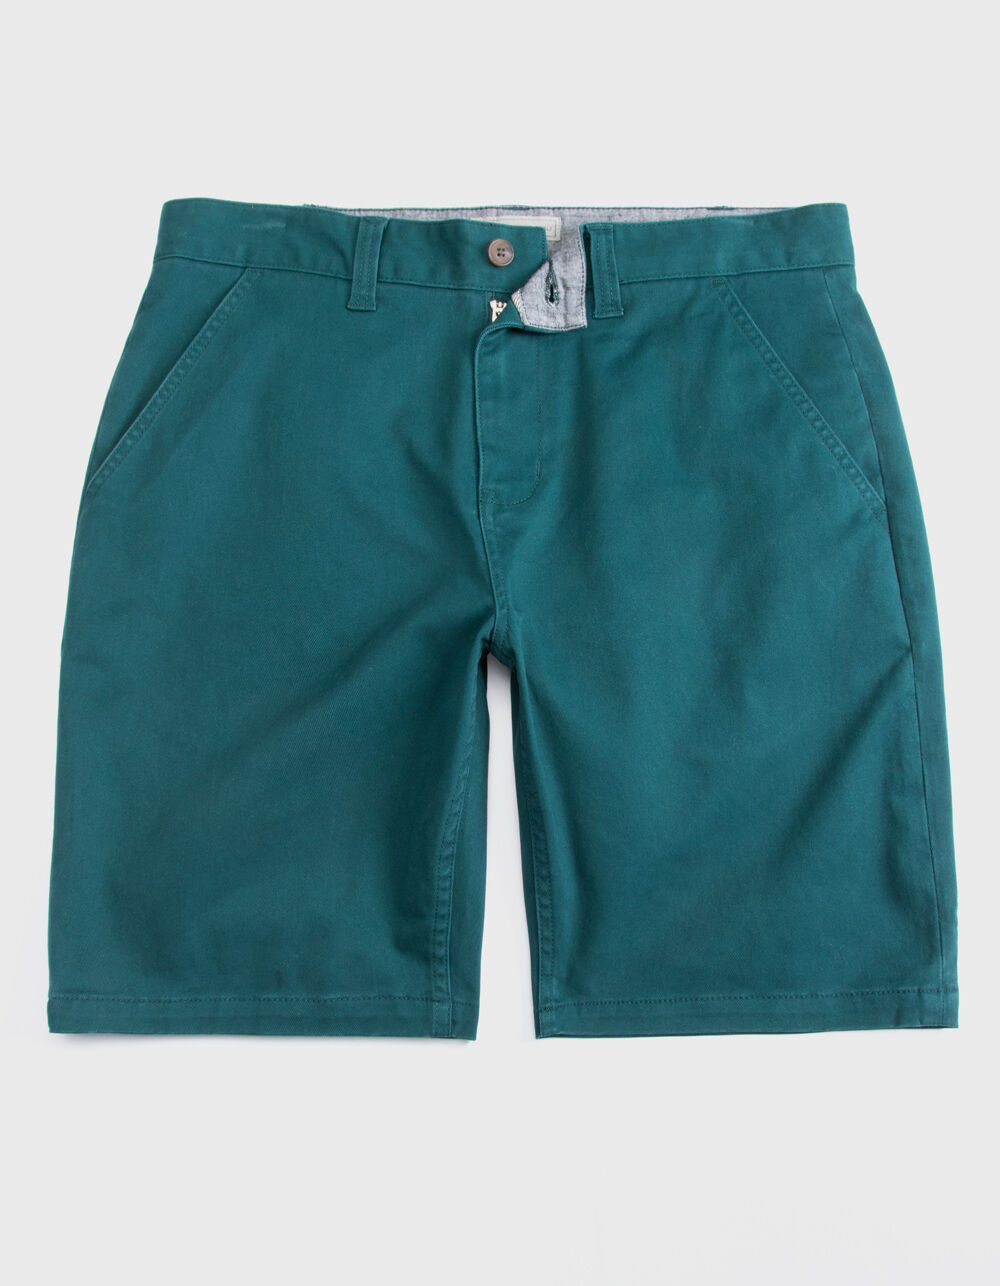 CHARLES AND A HALF Lincoln Stretch Teal Blue Mens Shorts - TEBLU | Tillys